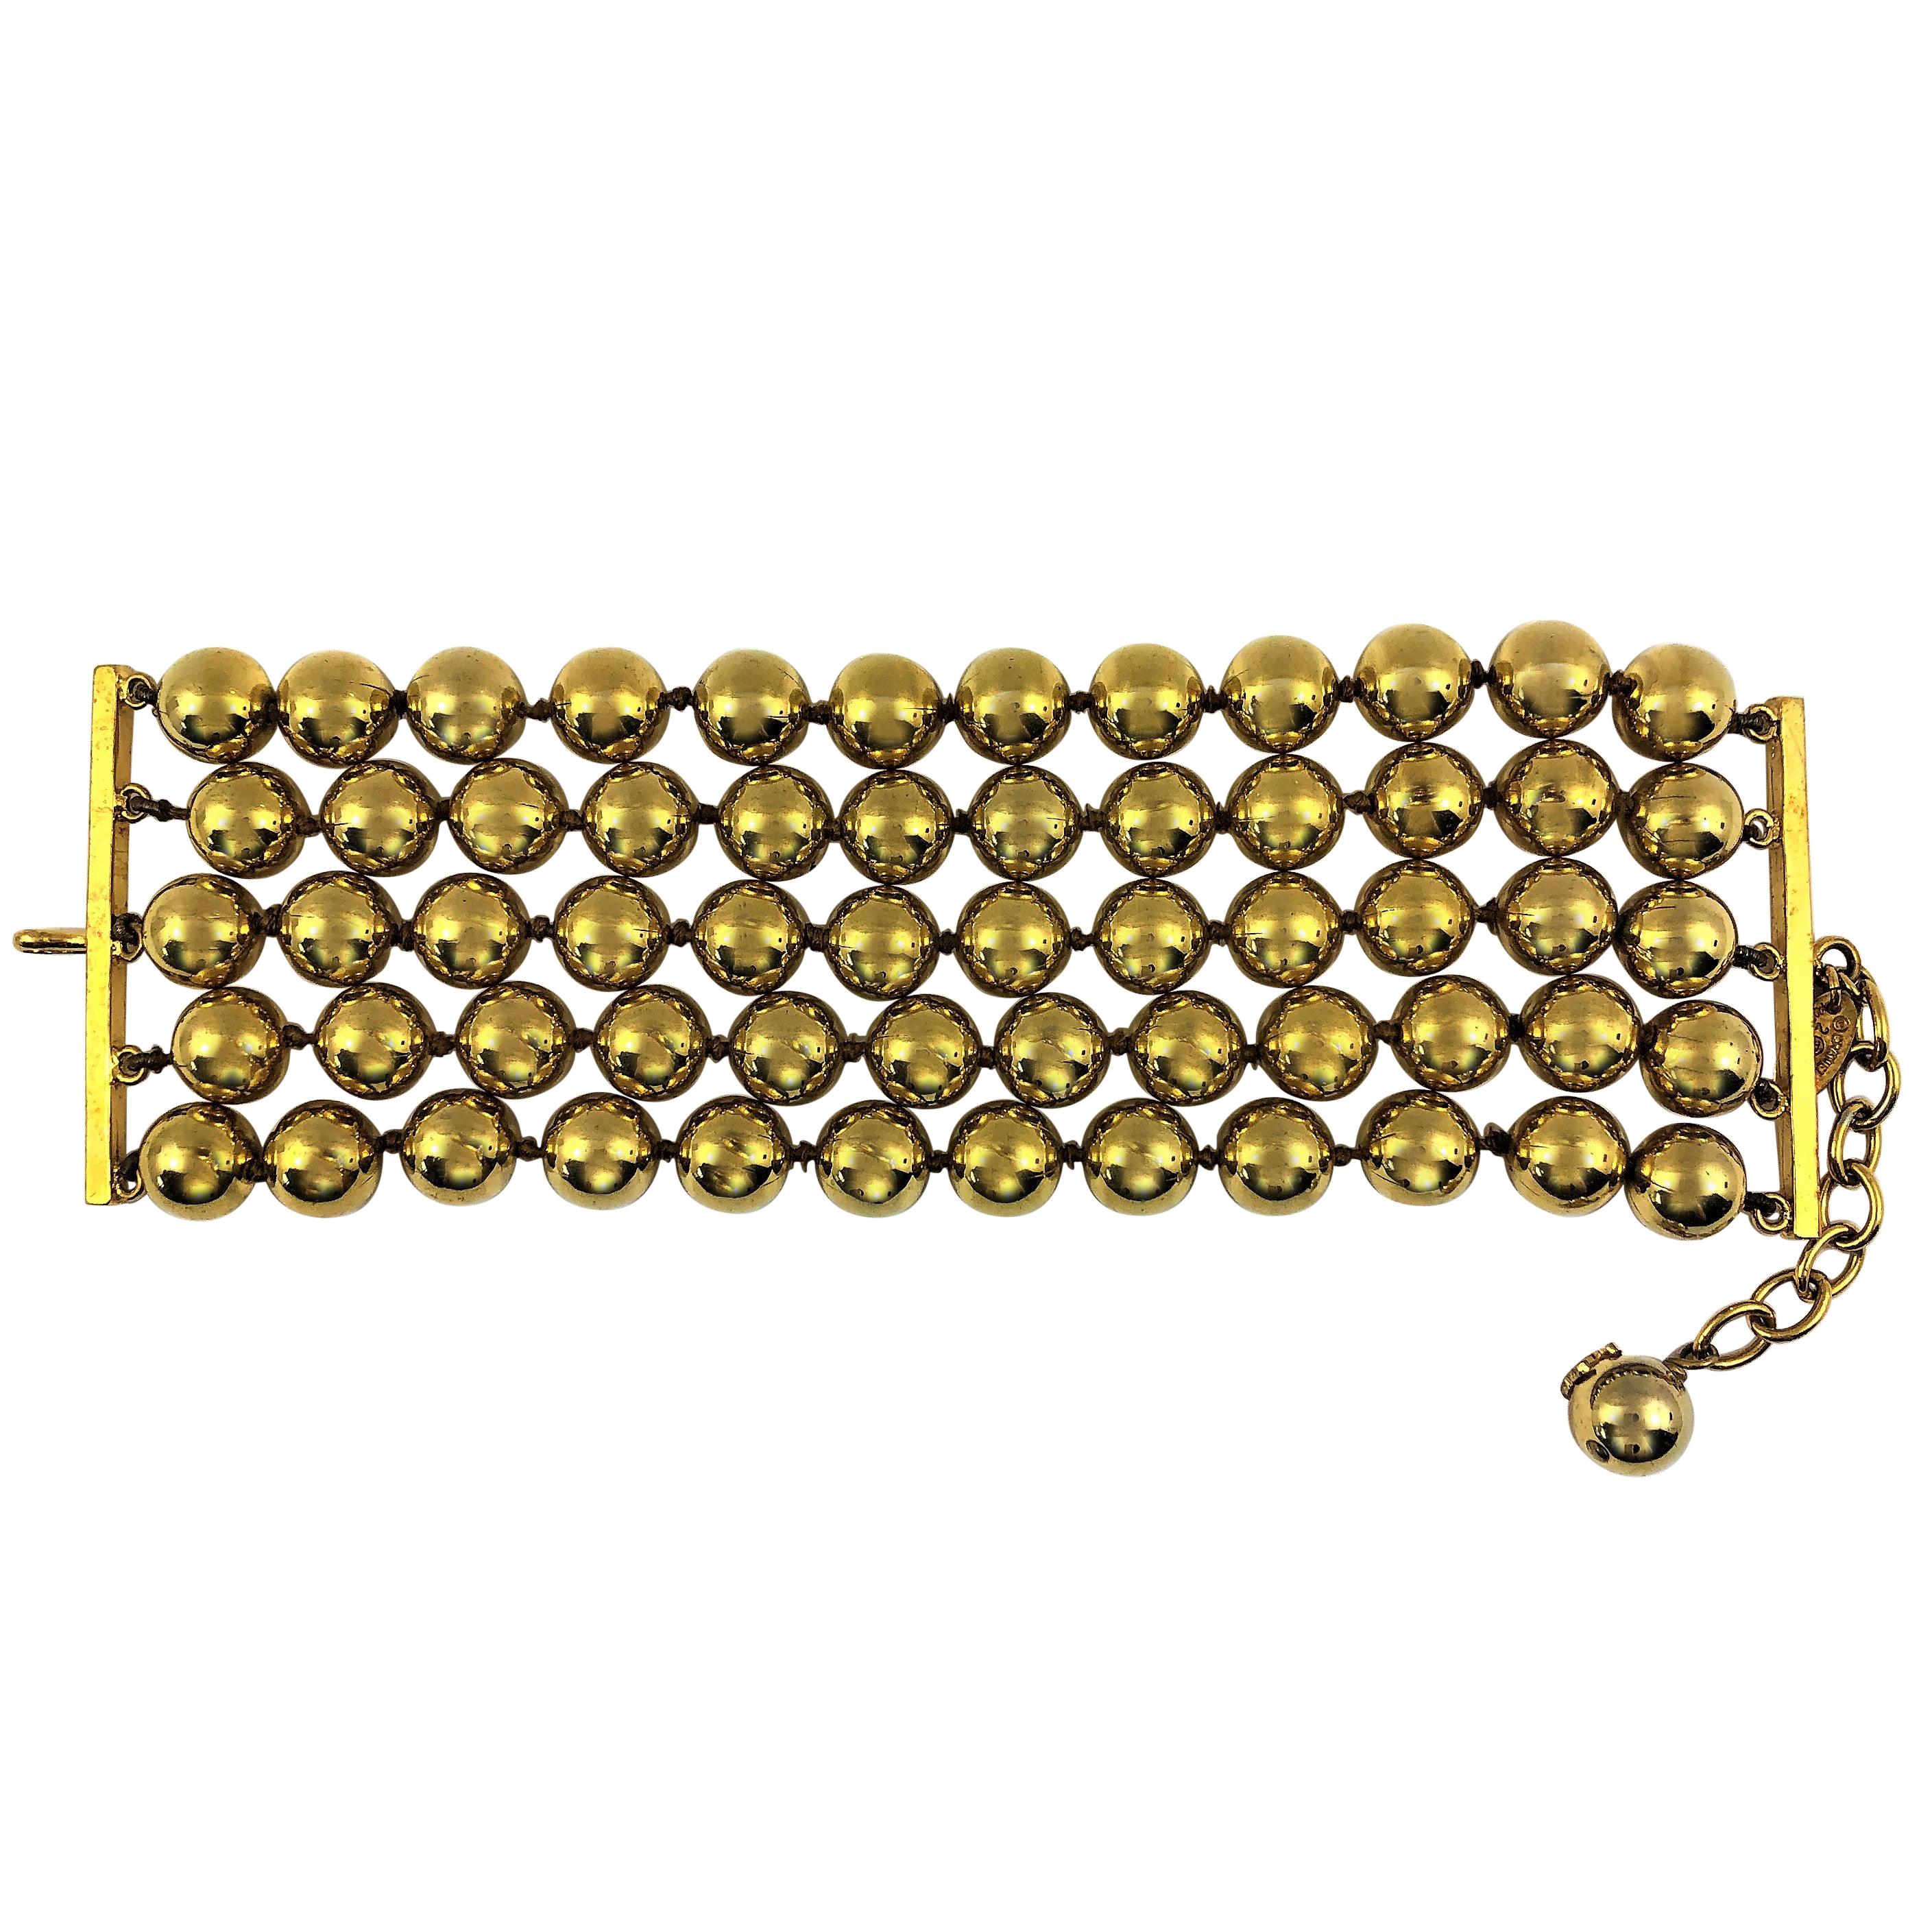 Vintage Chanel Gold Tone Five Row 2 1/4 Inch Wide Ball Bracelet